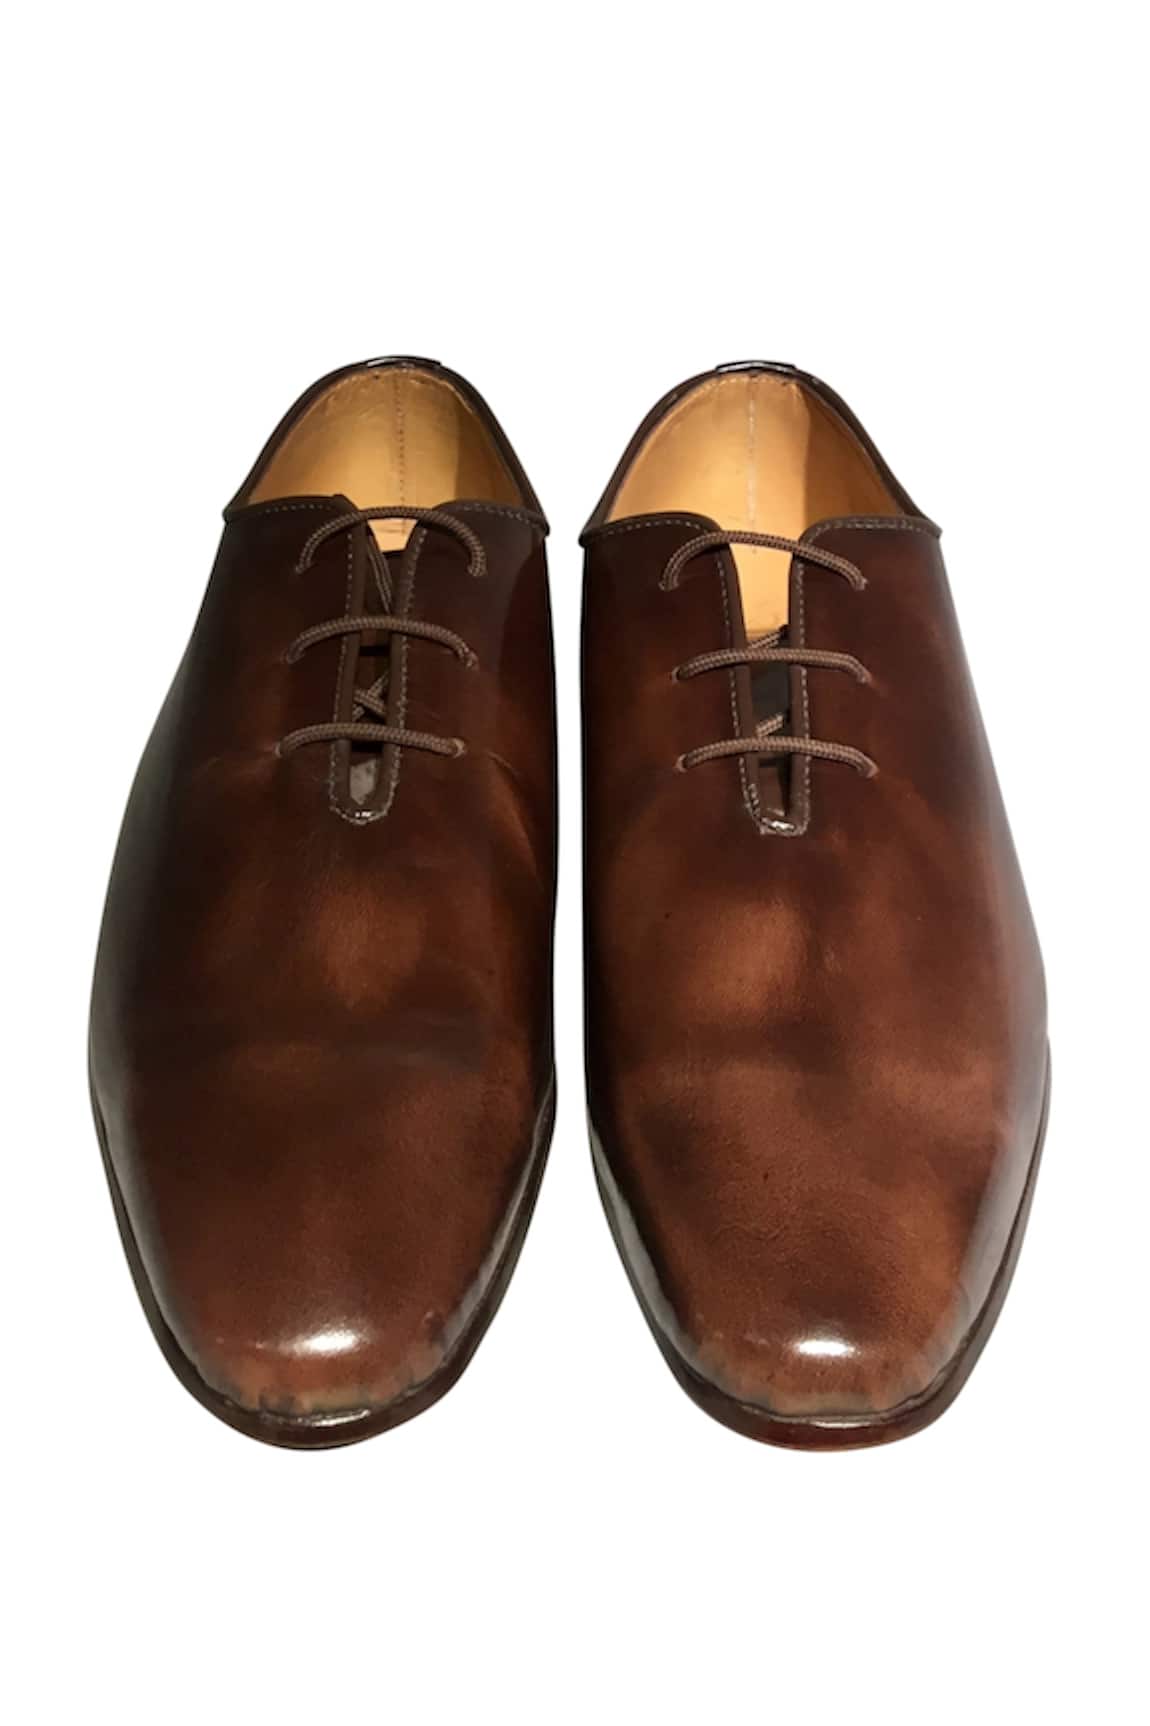 Why is it expensive: The Berluti Alessandro leather shoes